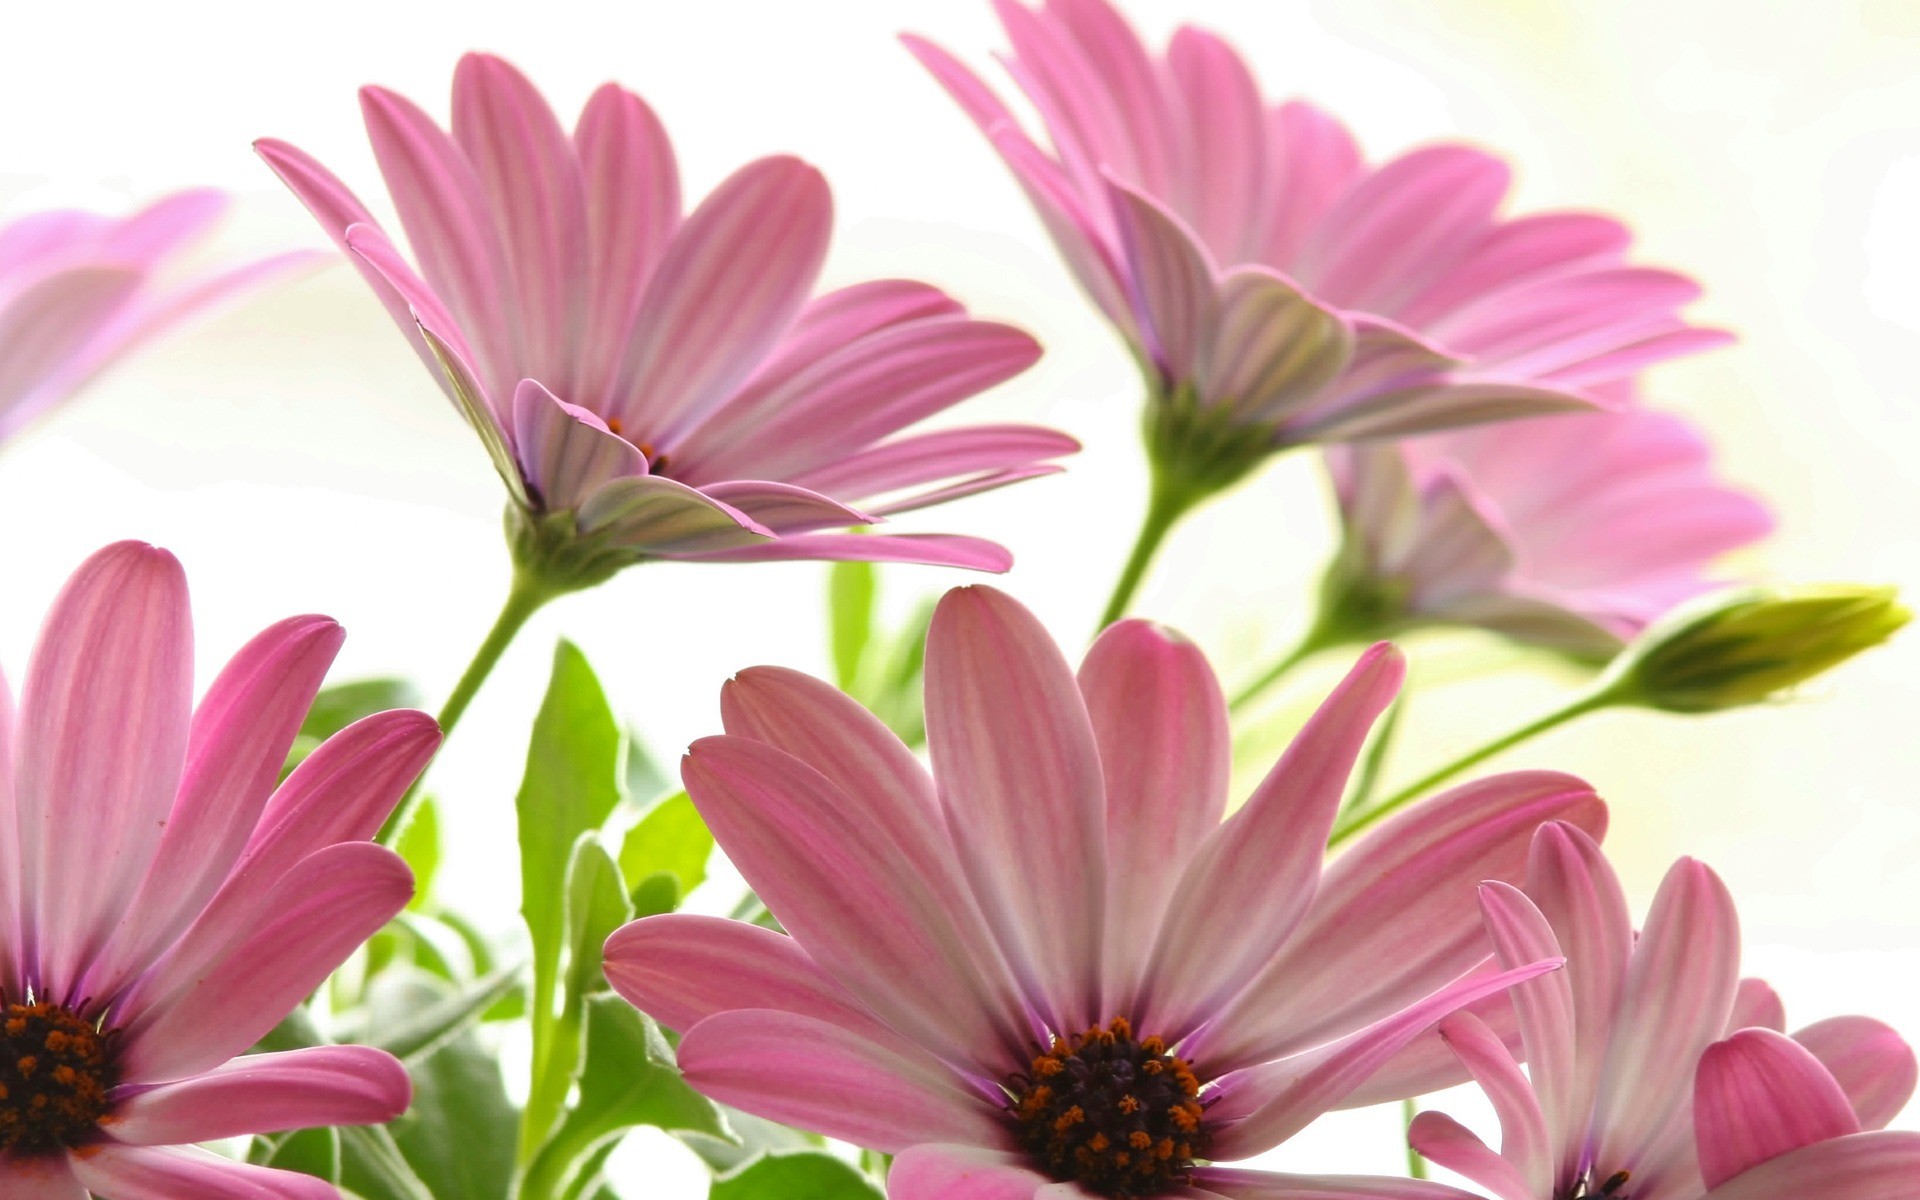 Pink Daisies Wallpaper Flowers Nature Wallpapers